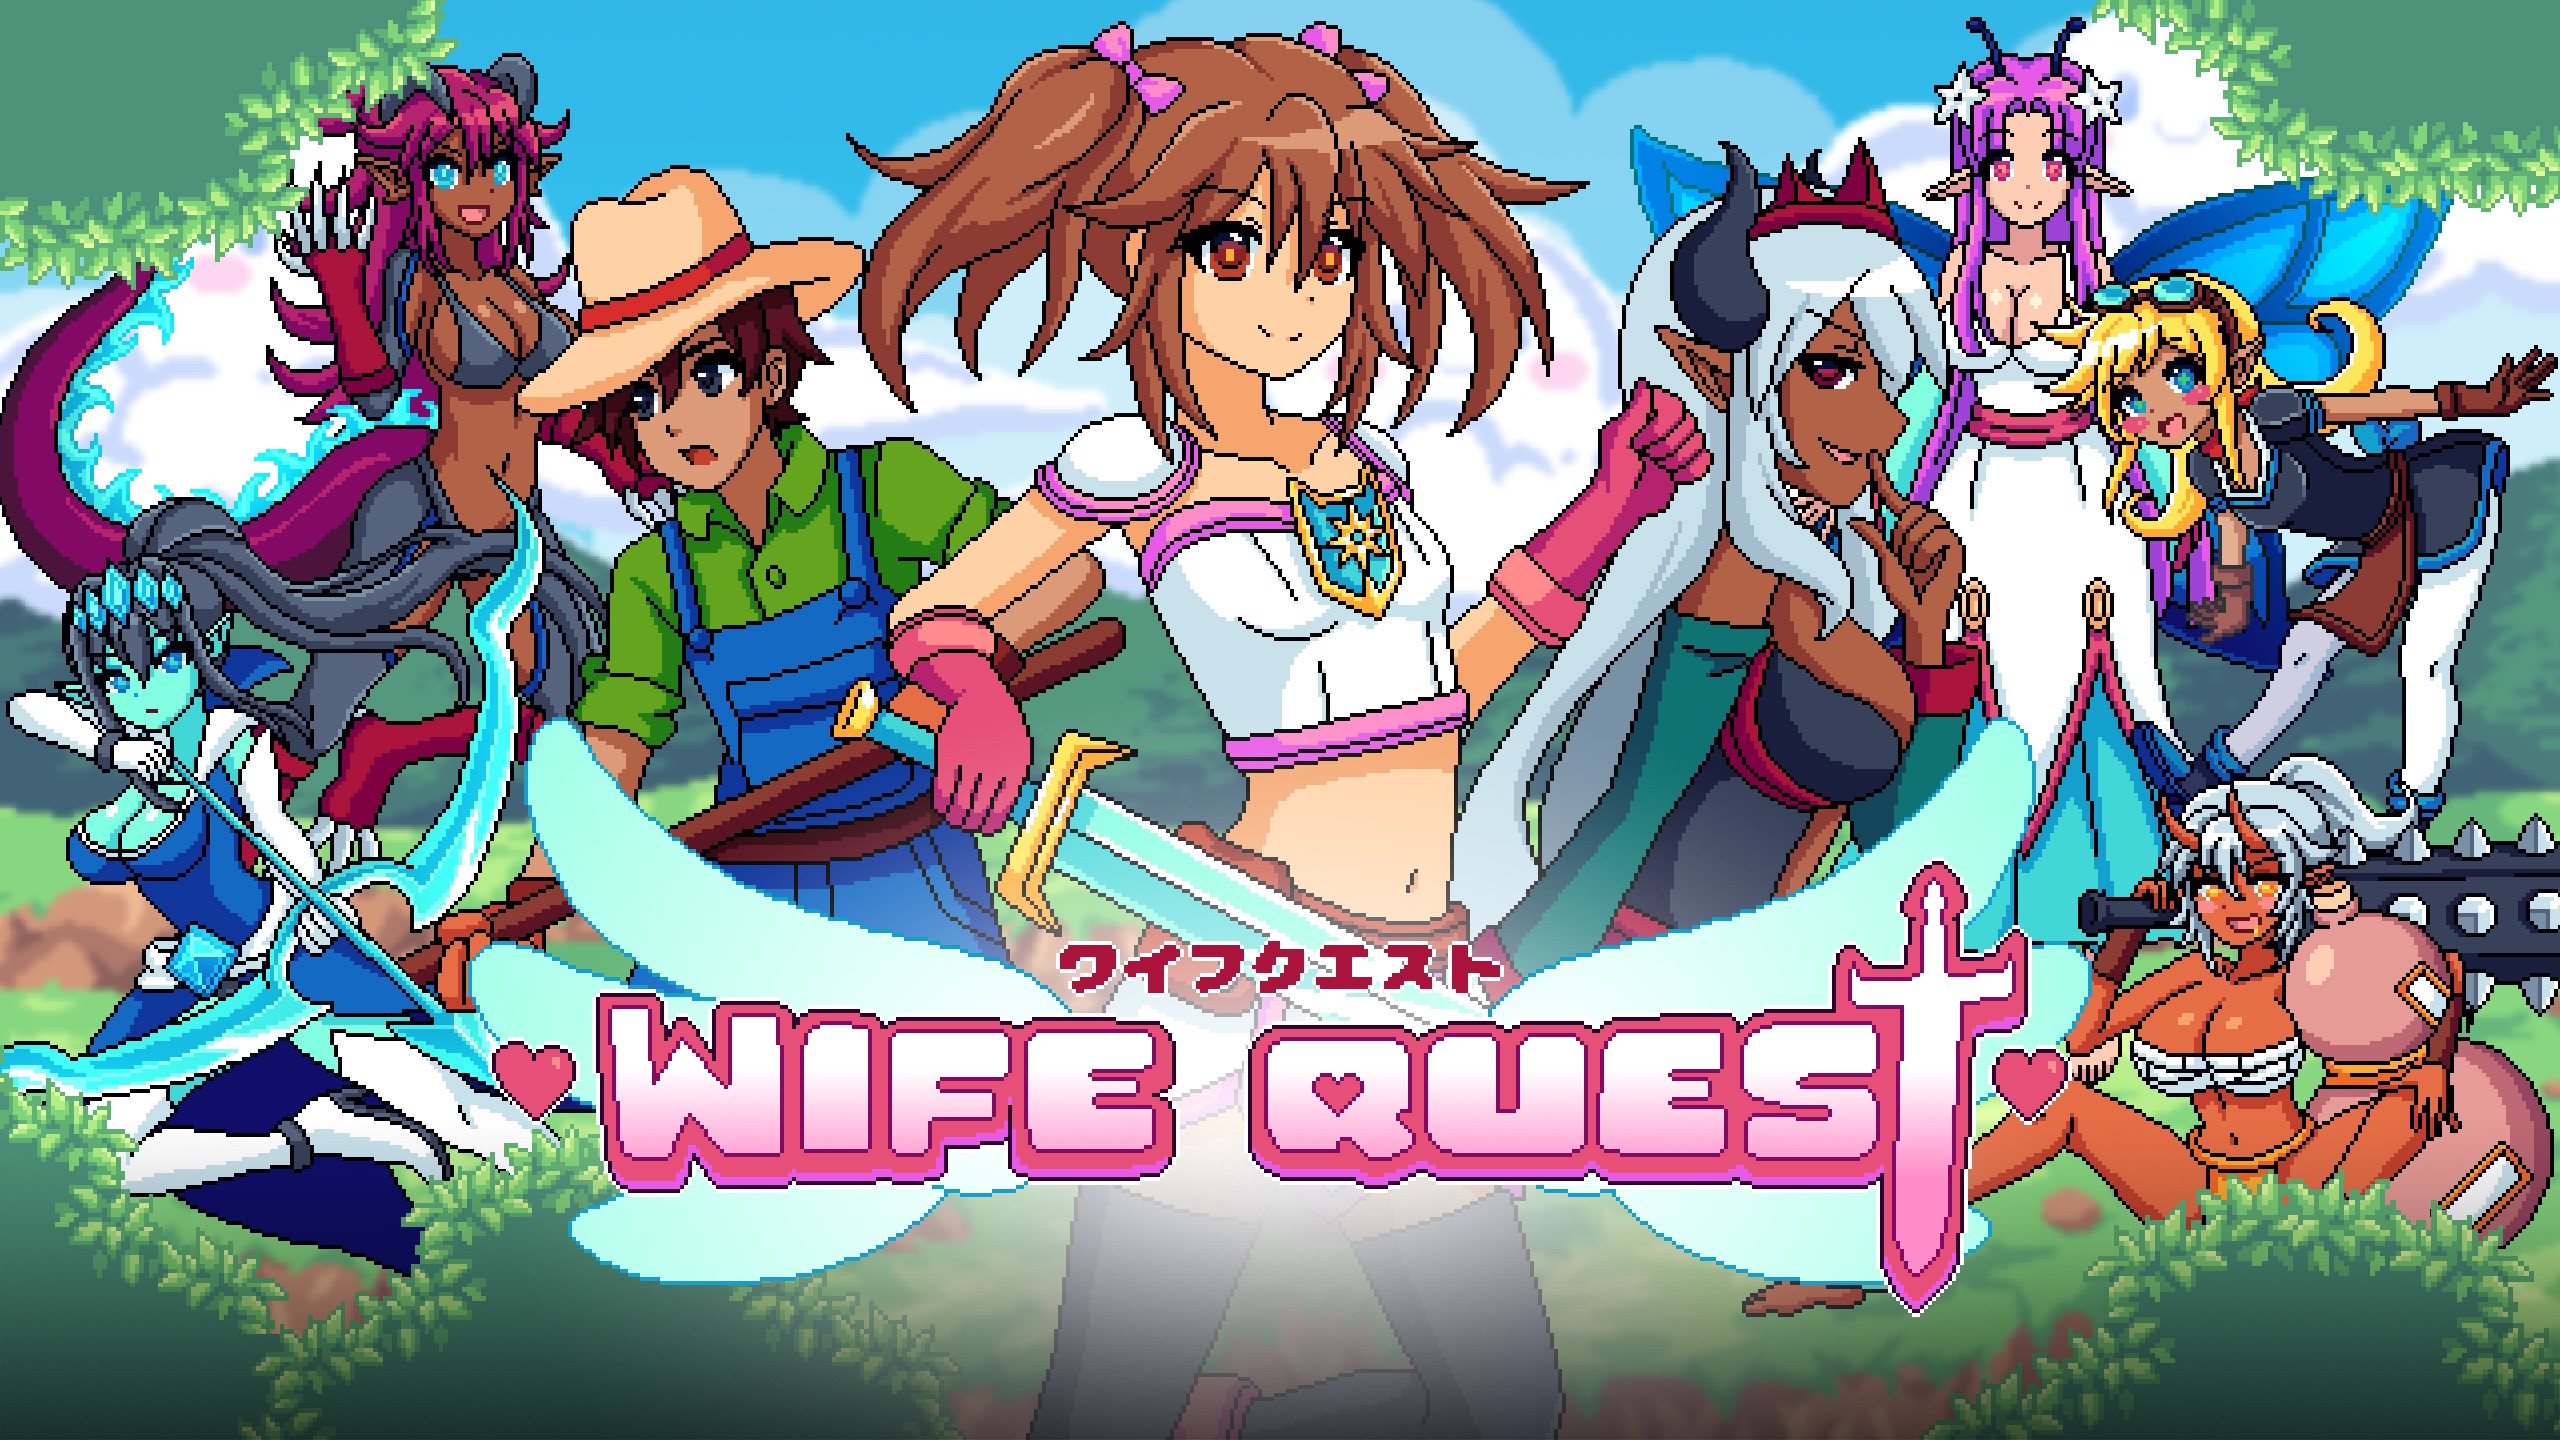 Wife quest. Wife Quest [Final] [Starworks]. Wife Quest Walkthrough. Wife Quest 1.0 Starworks прохождение.